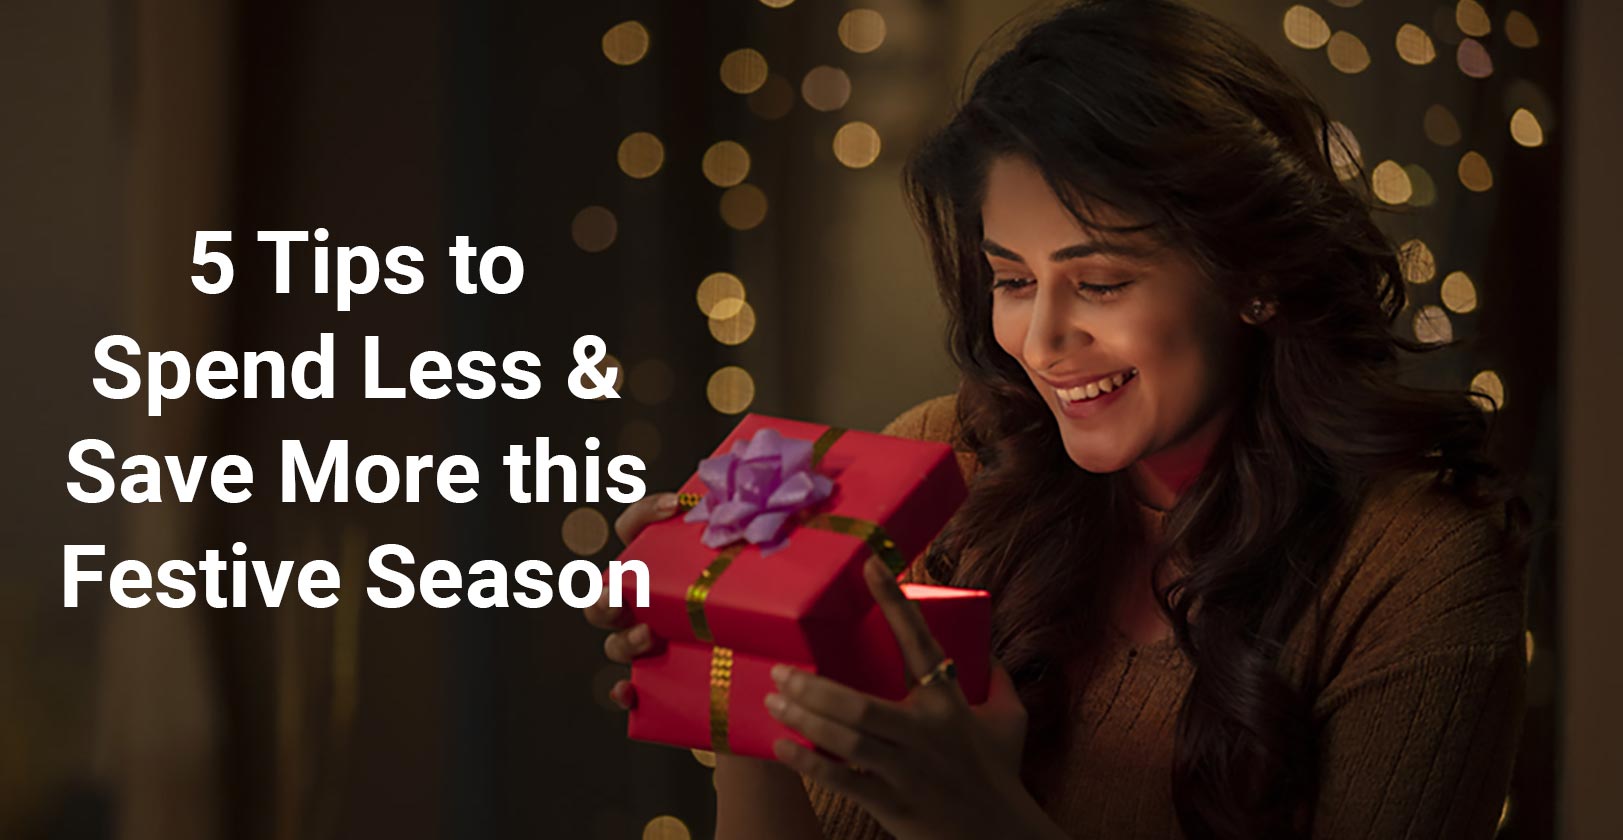 5 Tips to Spend Less & Save More this Festive Season